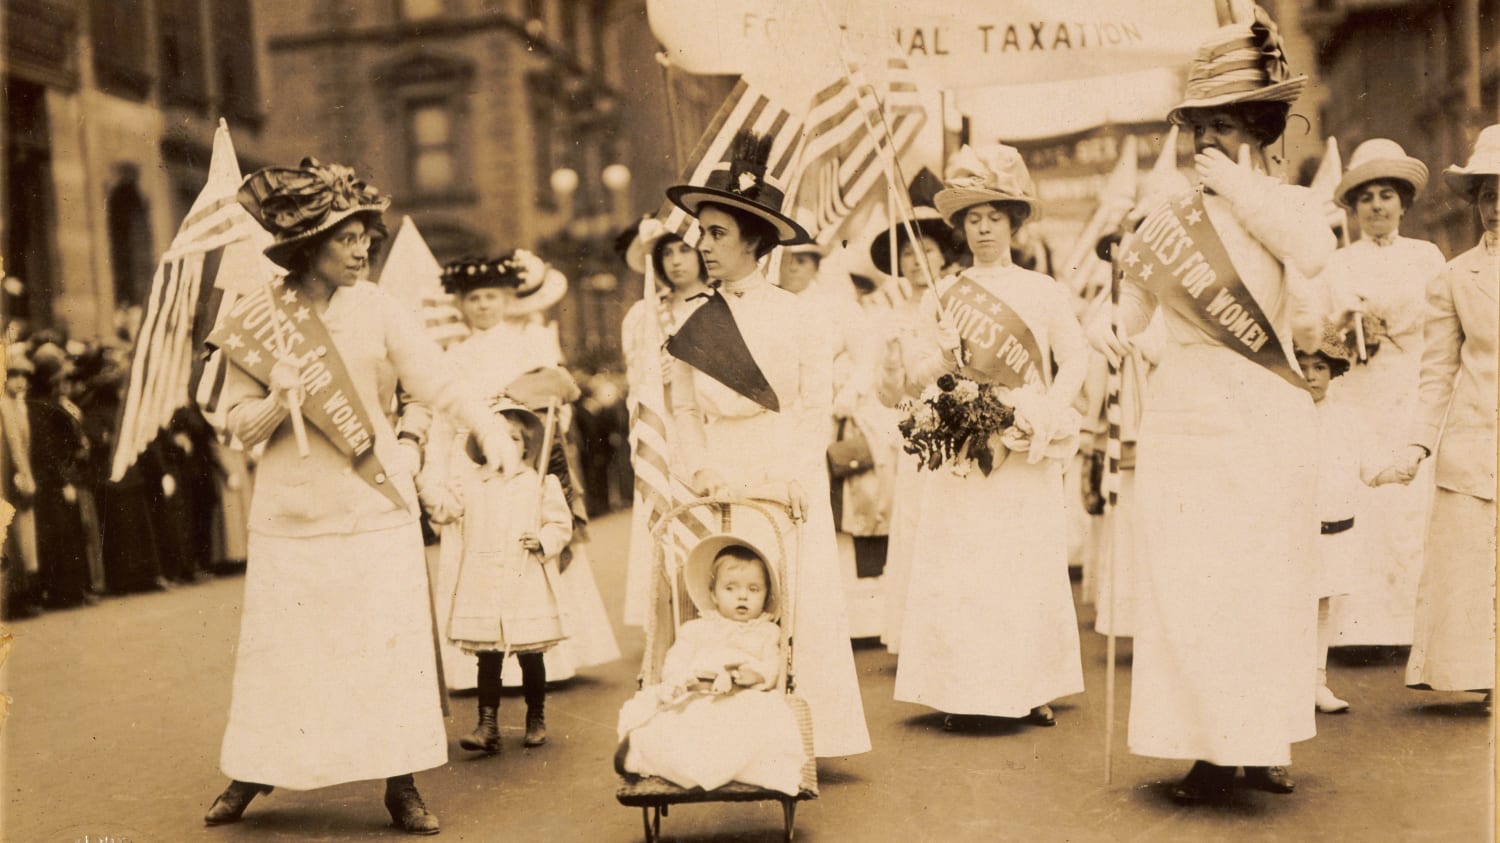 The Library of Congress Needs Help Transcribing 16,000 Pages of Suffragist Diaries, Letters, and Documents